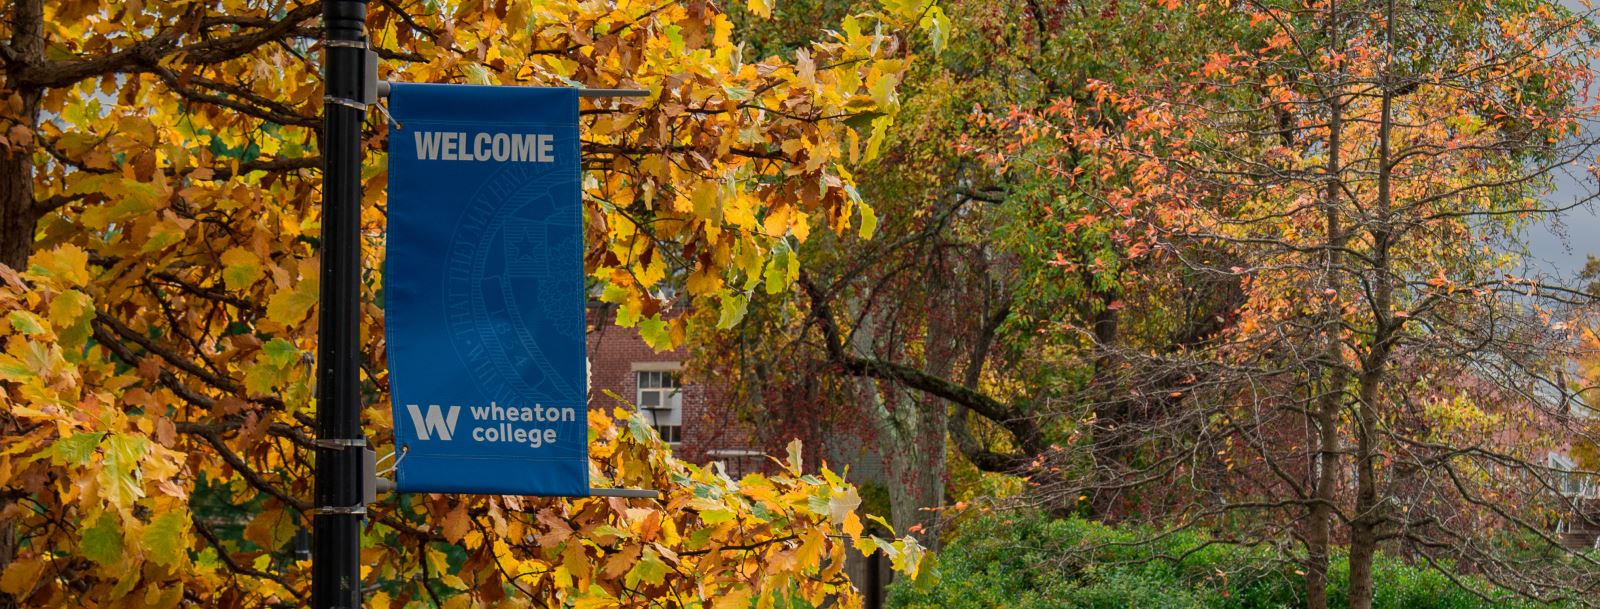 Trees with golden, fall foliage and a blue banner that reads Welcome. Wheaton College.